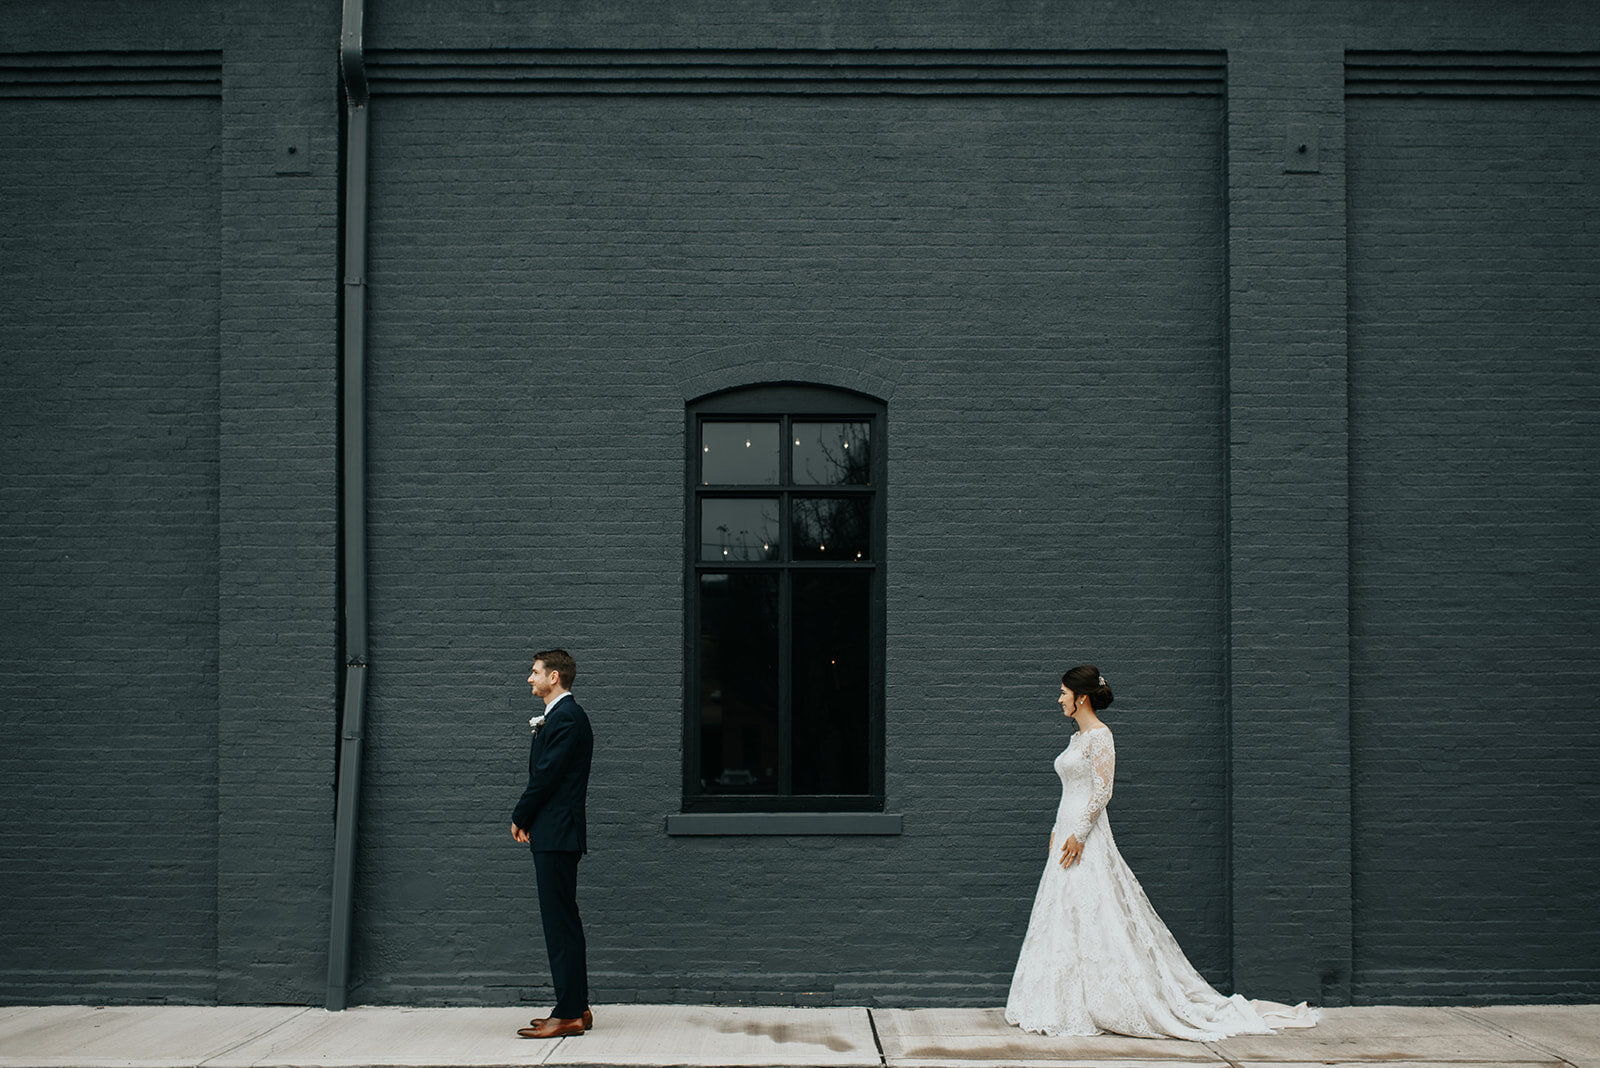 First looks with the beauty of High Line at your back 🖤🥰 Photography by @theoryimage. 

Image descriptions:
Image one: A bride and groom stand several feet apart, with the groom's back to the bride. A window is framed between them. 
Image two: A cl